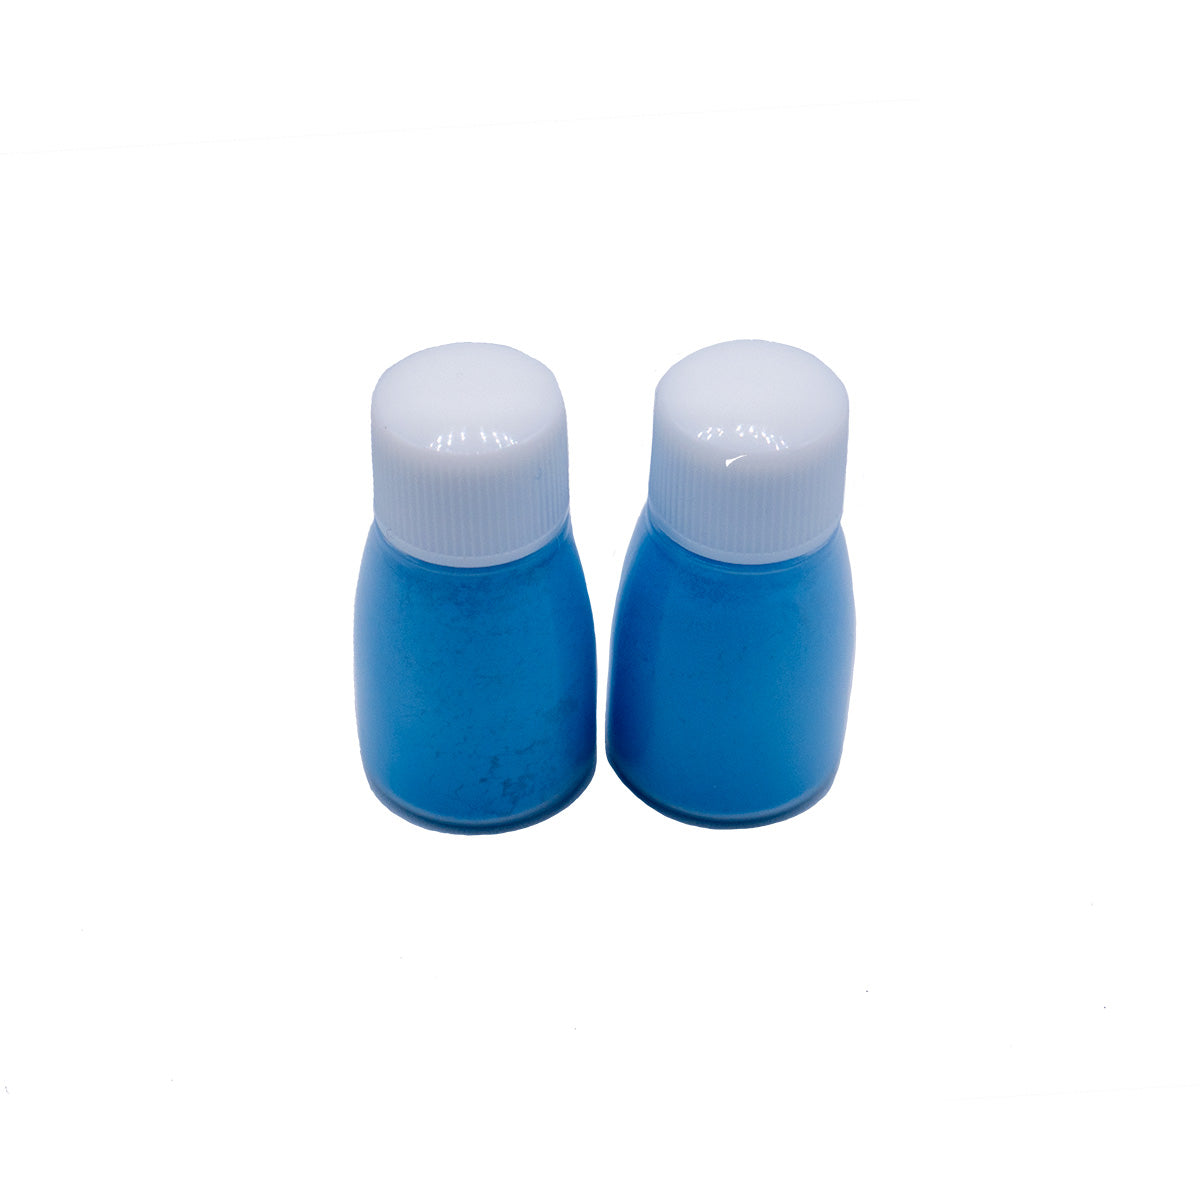 Two blue bottles of the Chalk Liner Refill outside of its package.